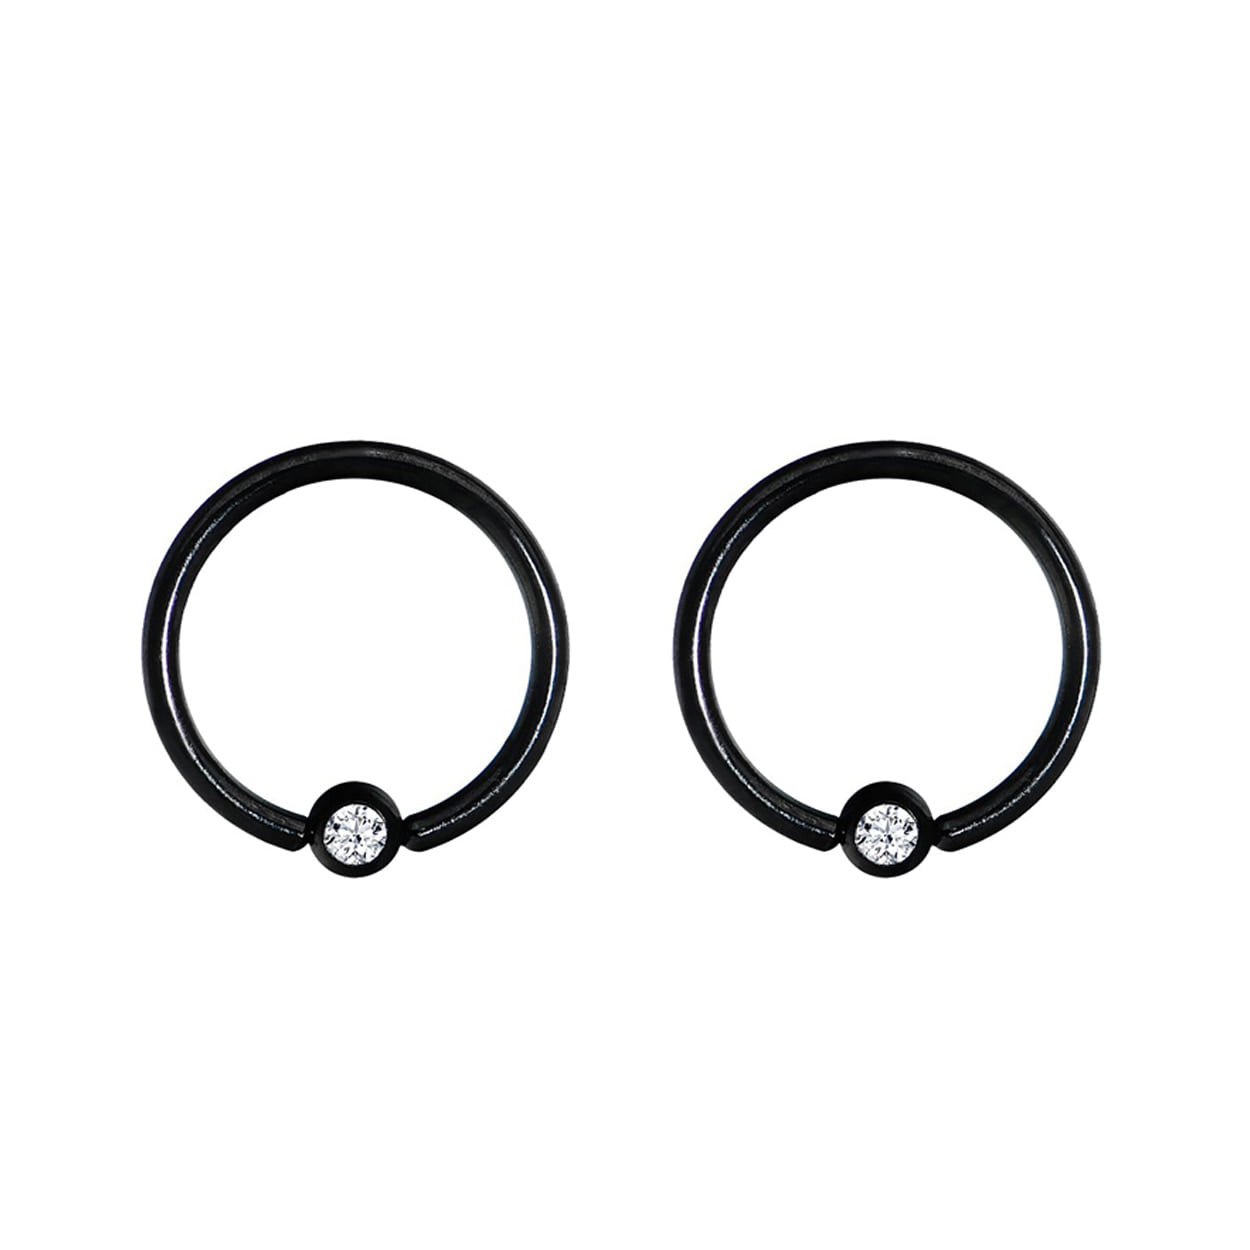 Ring,Length Piercing Tongue Stud Black Screw Captive Ball Ring with Stone 